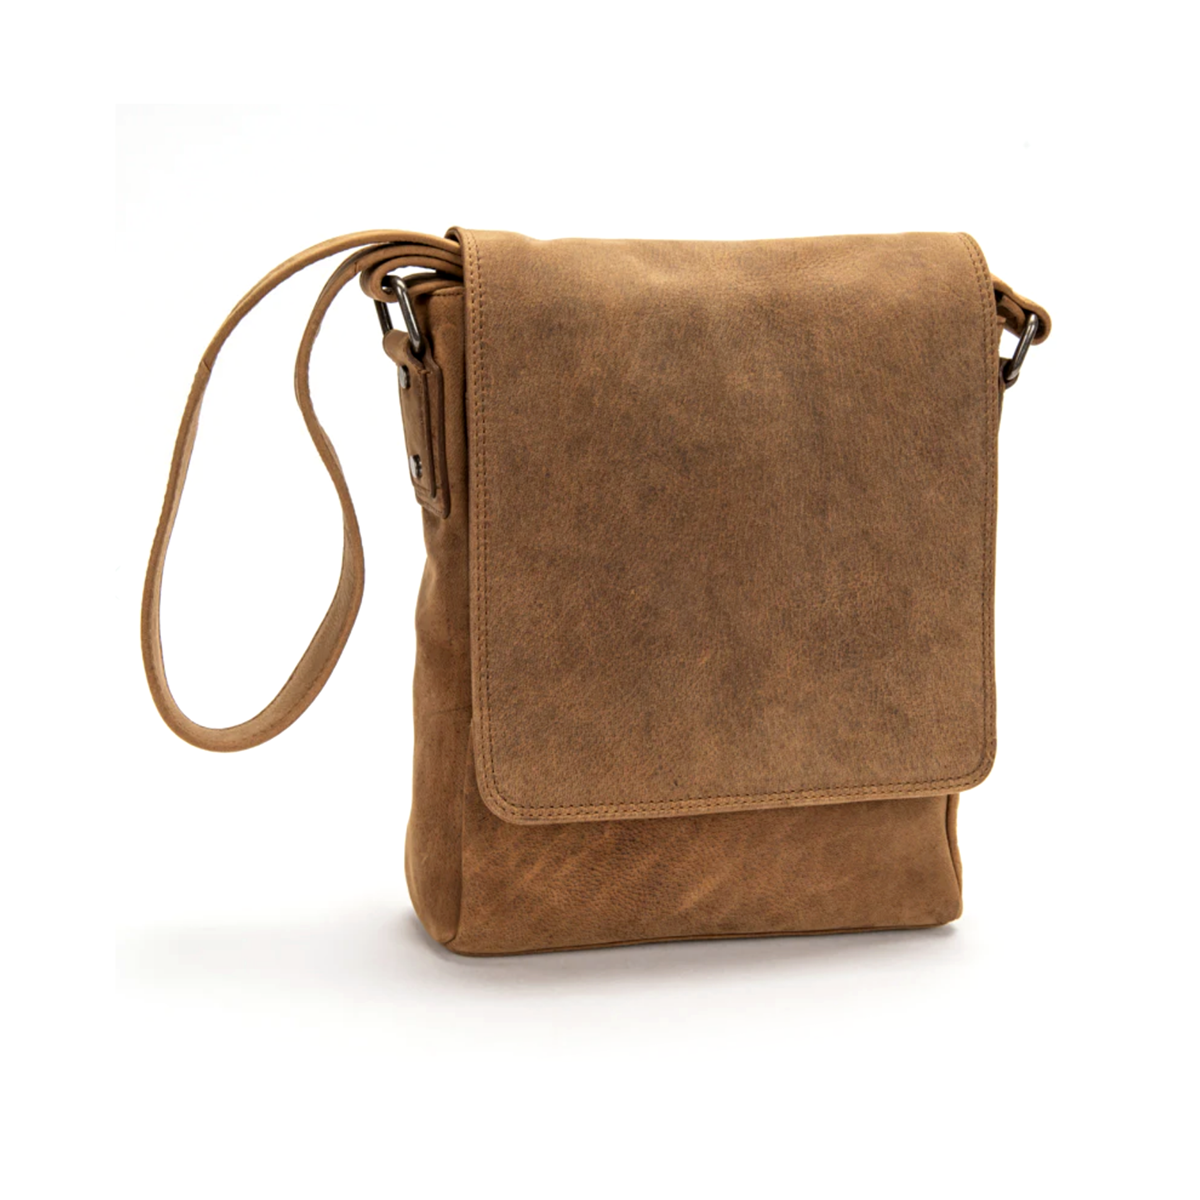 Adrian Klis - Leather Messenger Bag 2430 - Available at MAKE Vancouver